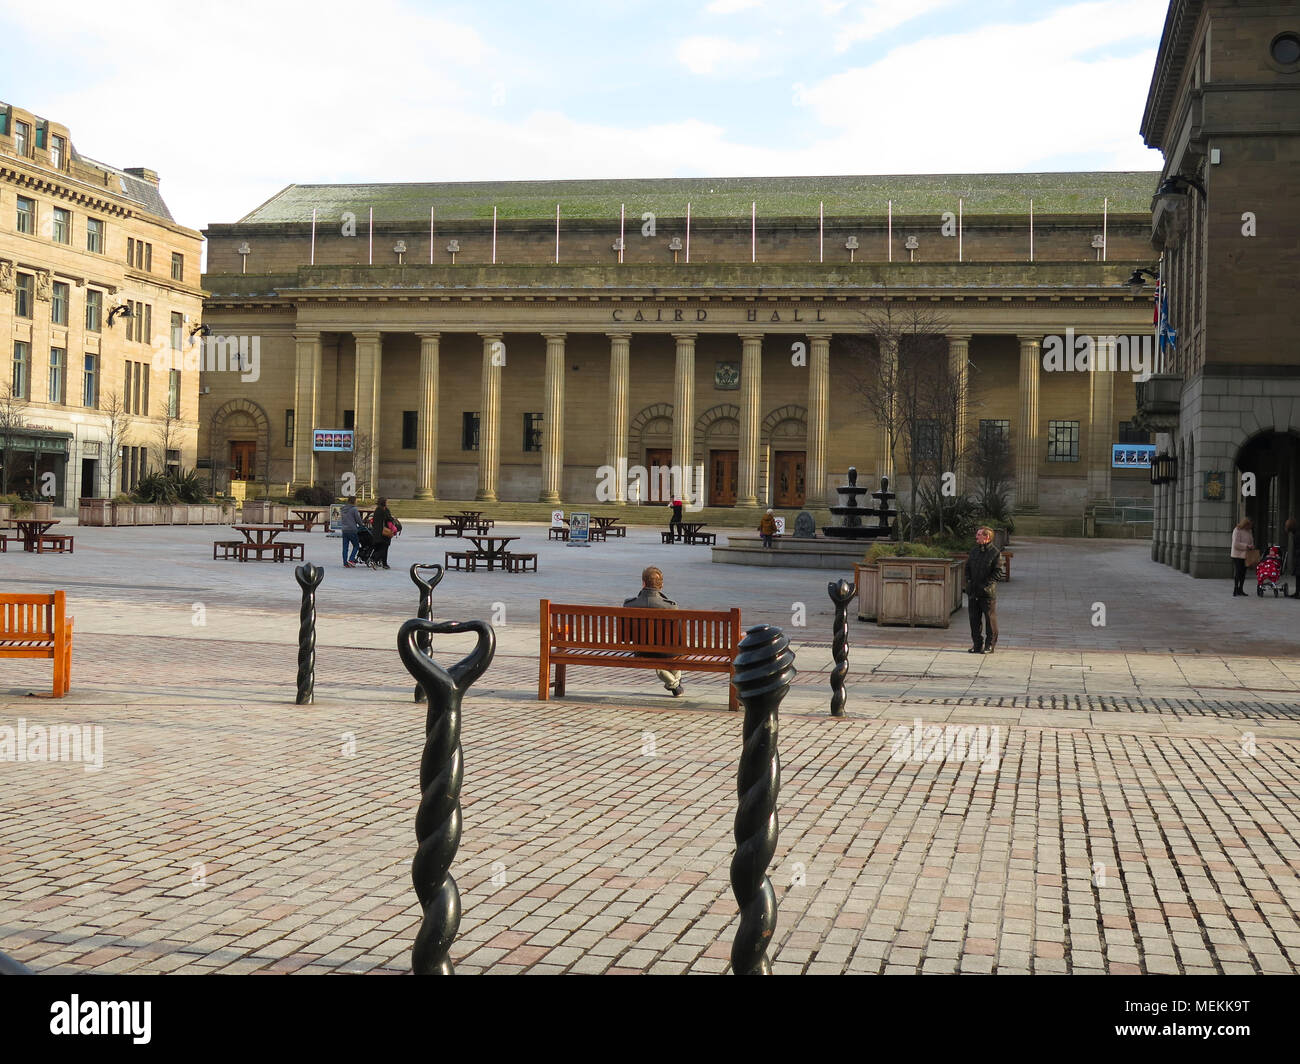 Caird Hall und City Square Dundee Stockfoto